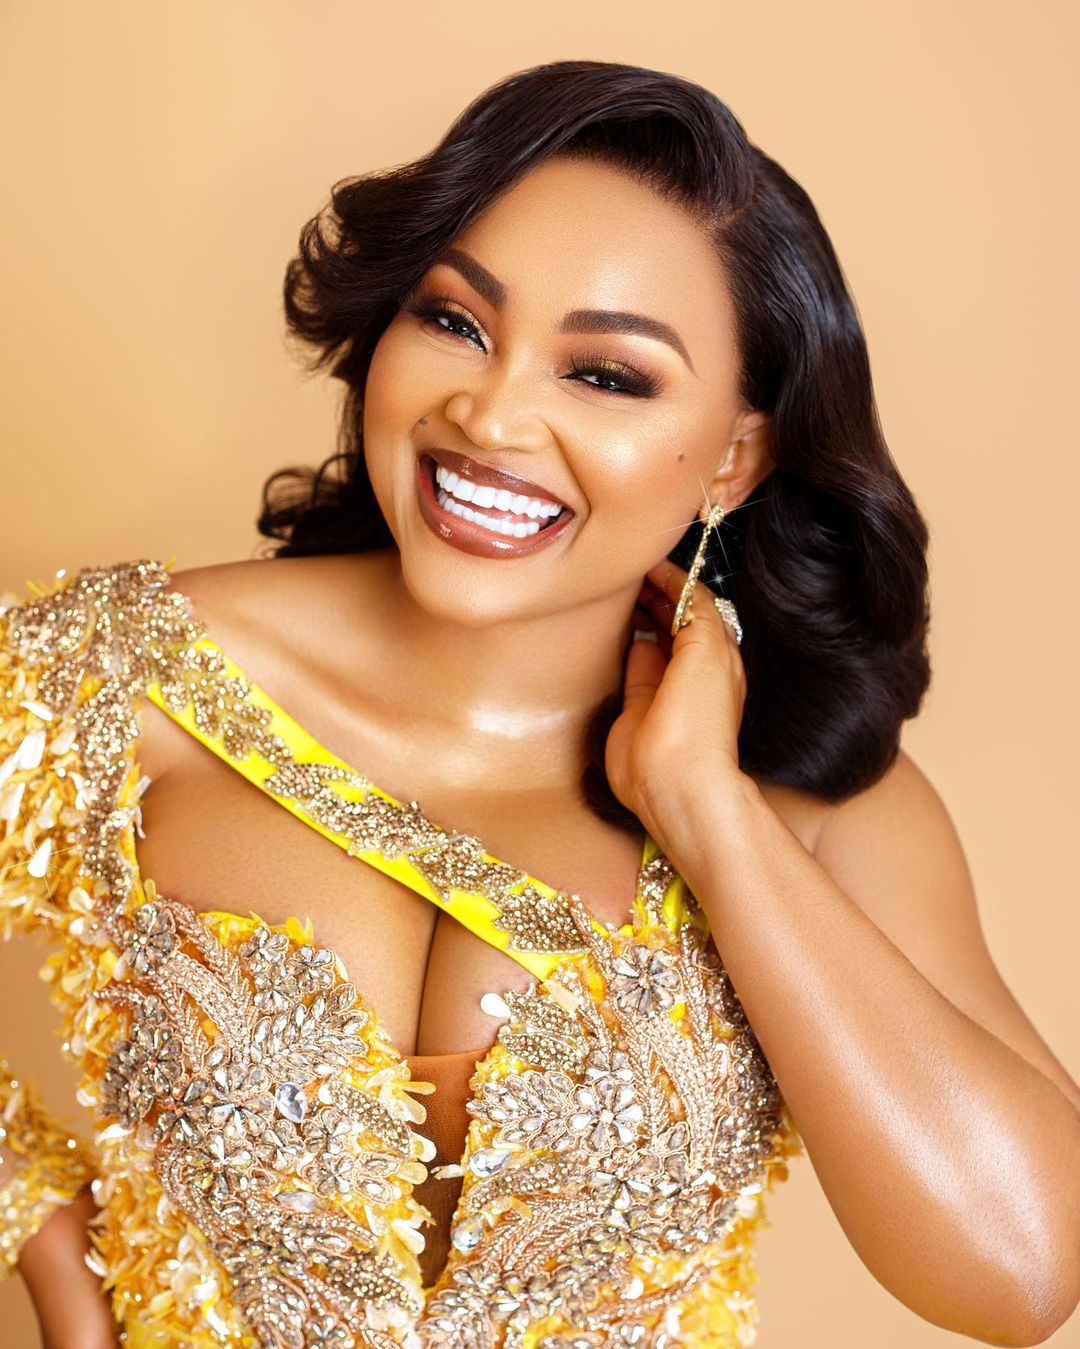 Mercy Aigbe laments